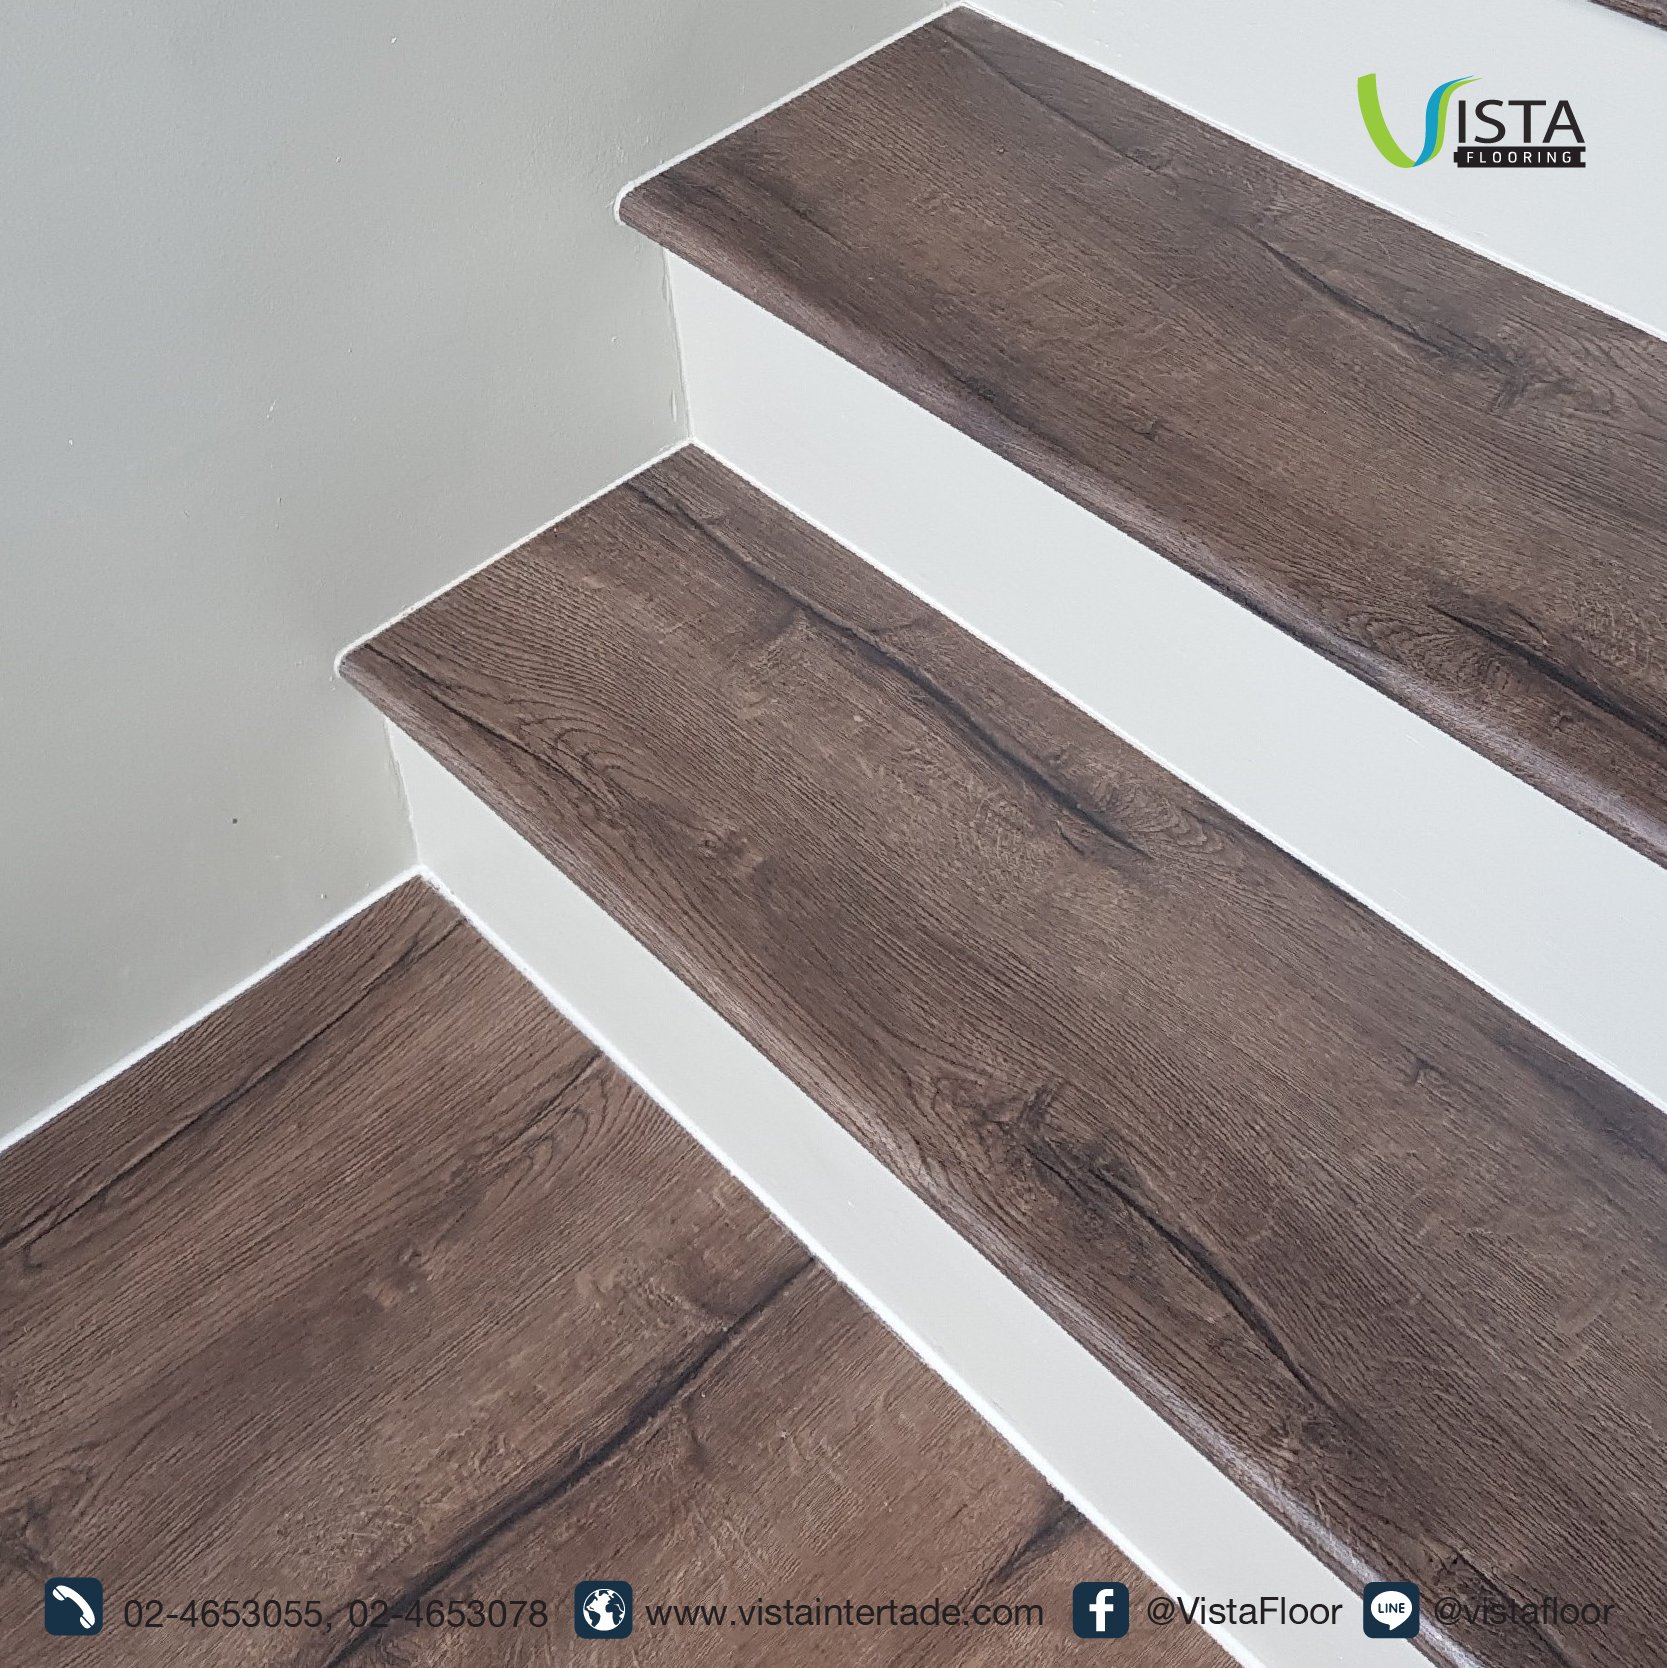 "Hybrid Functional Stairs" by Vista